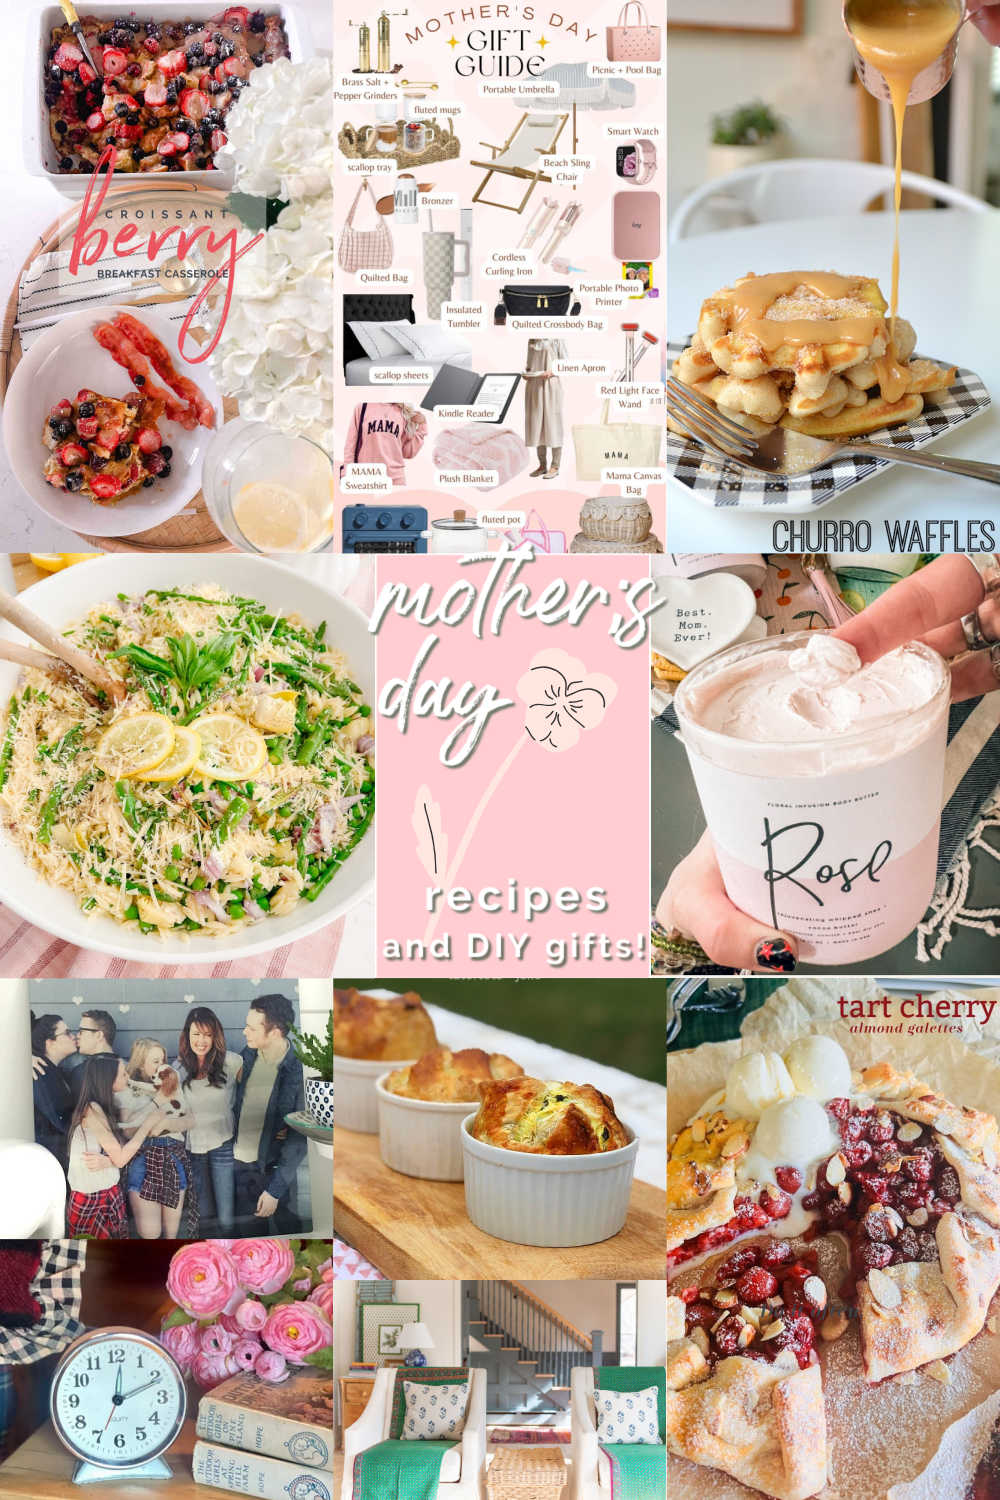 Mother's Day Gifts and Recipes - recipes and gift ideas for mom!